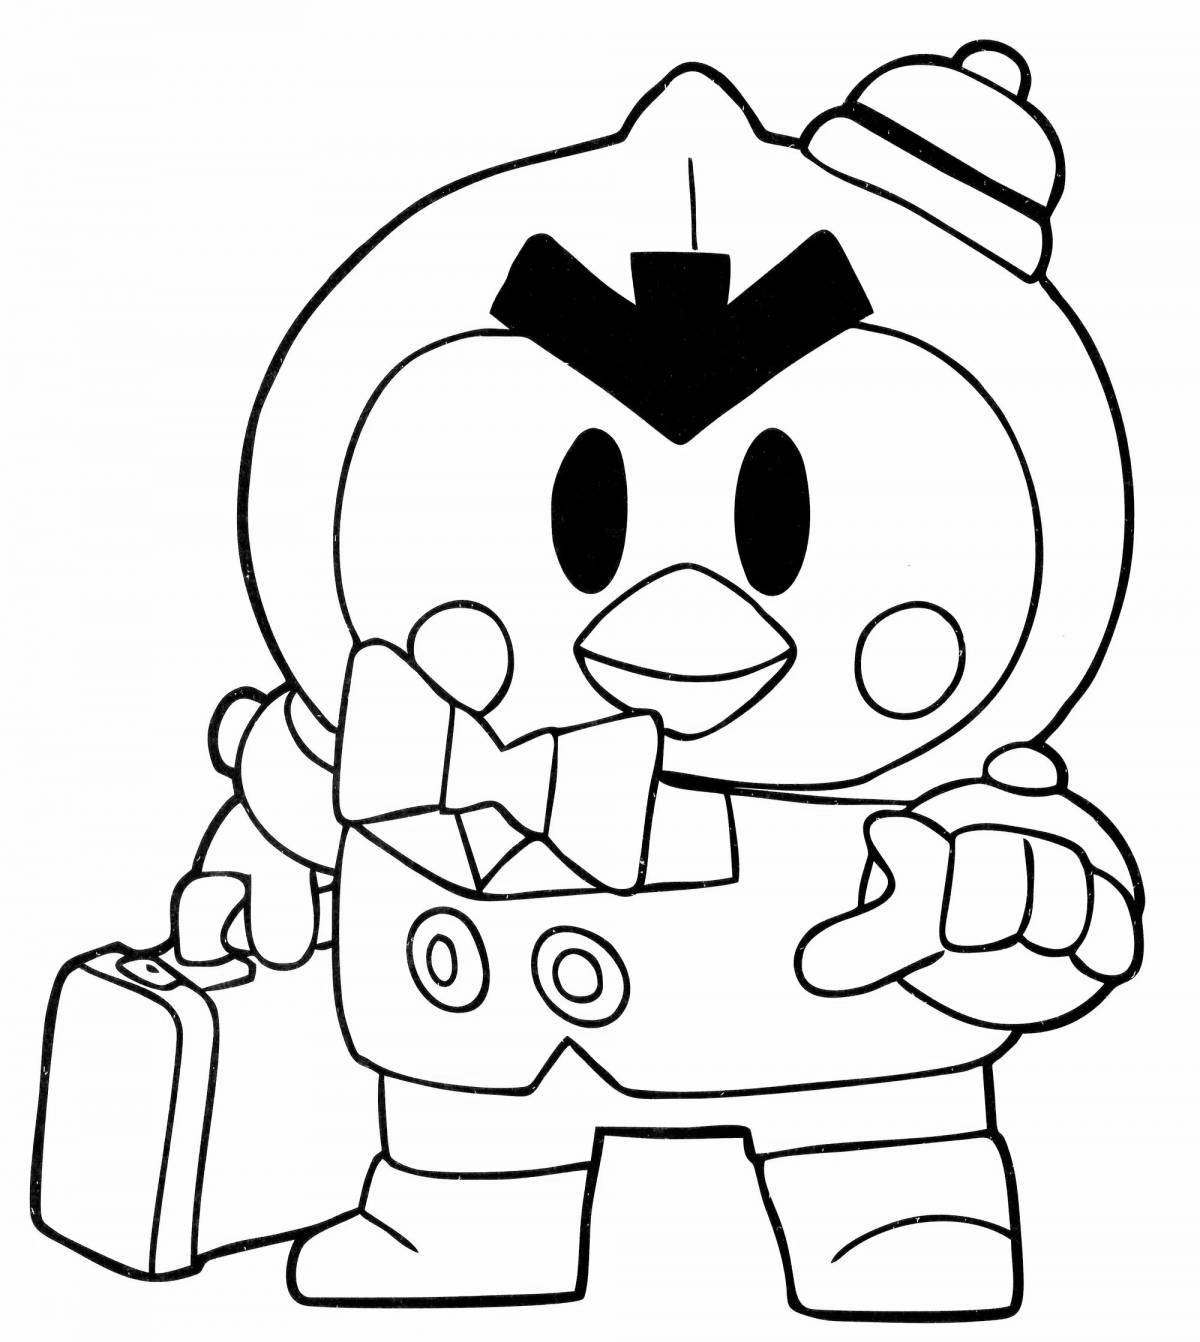 Bea cute coloring page